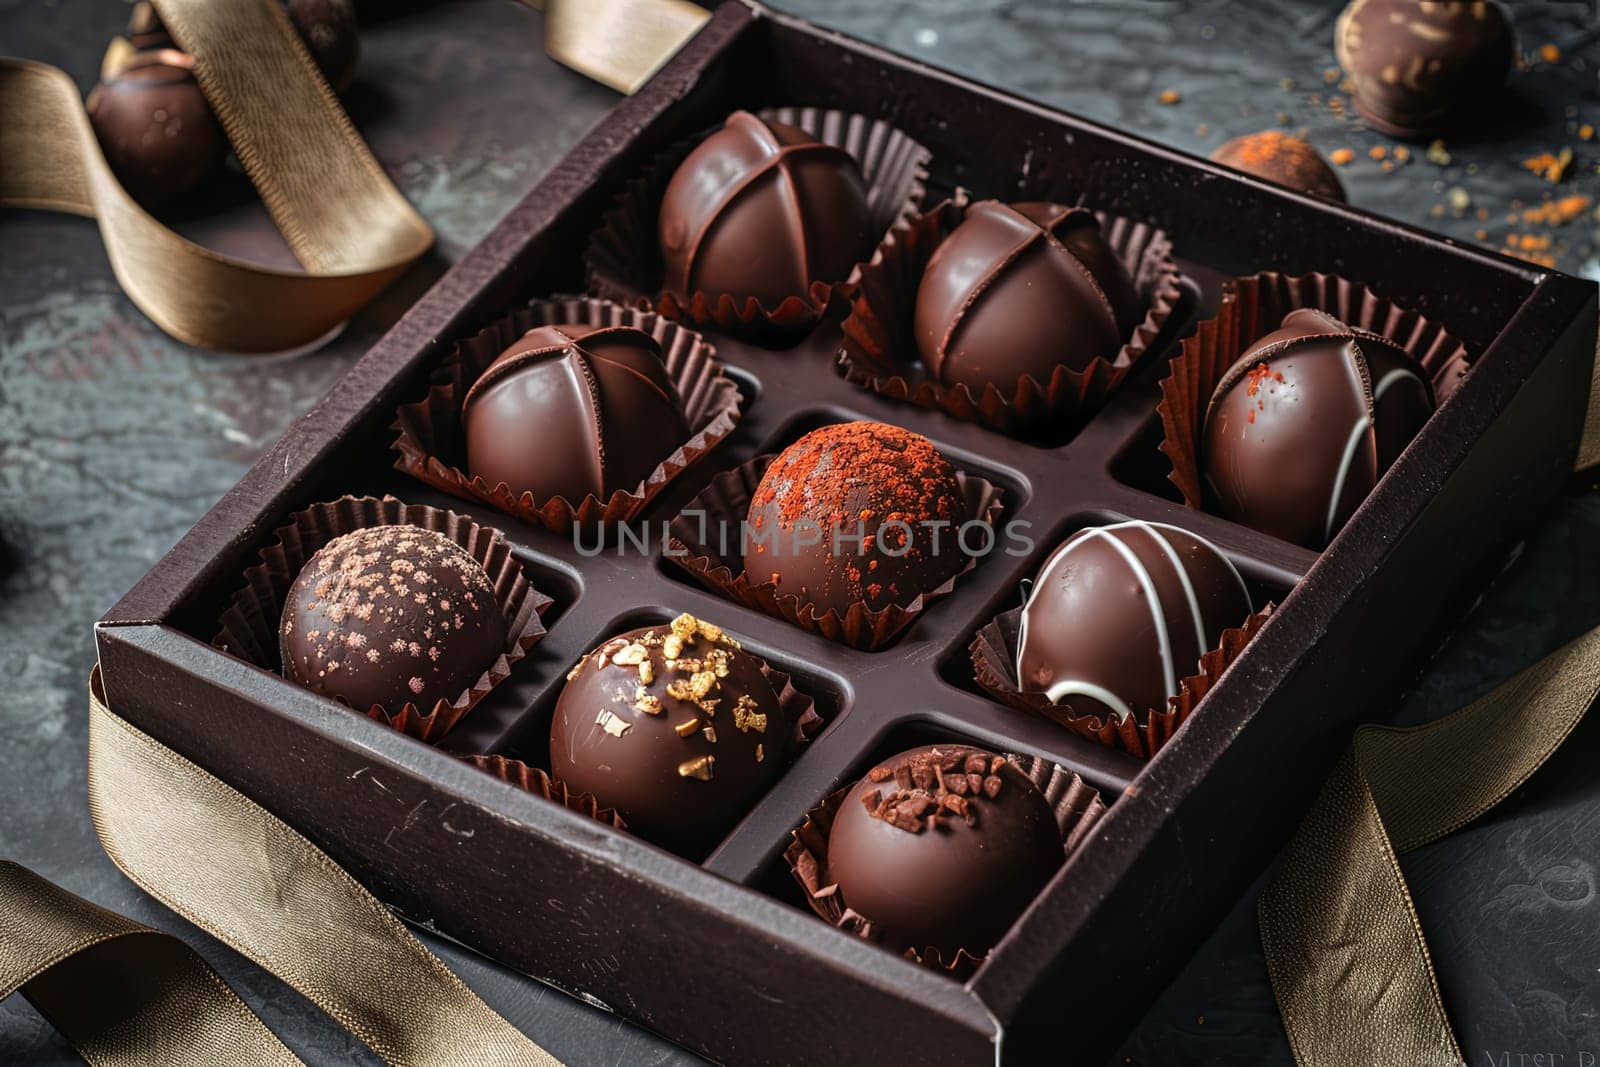 A detailed box of chocolate truffles with elegant ribbons sits on a table.